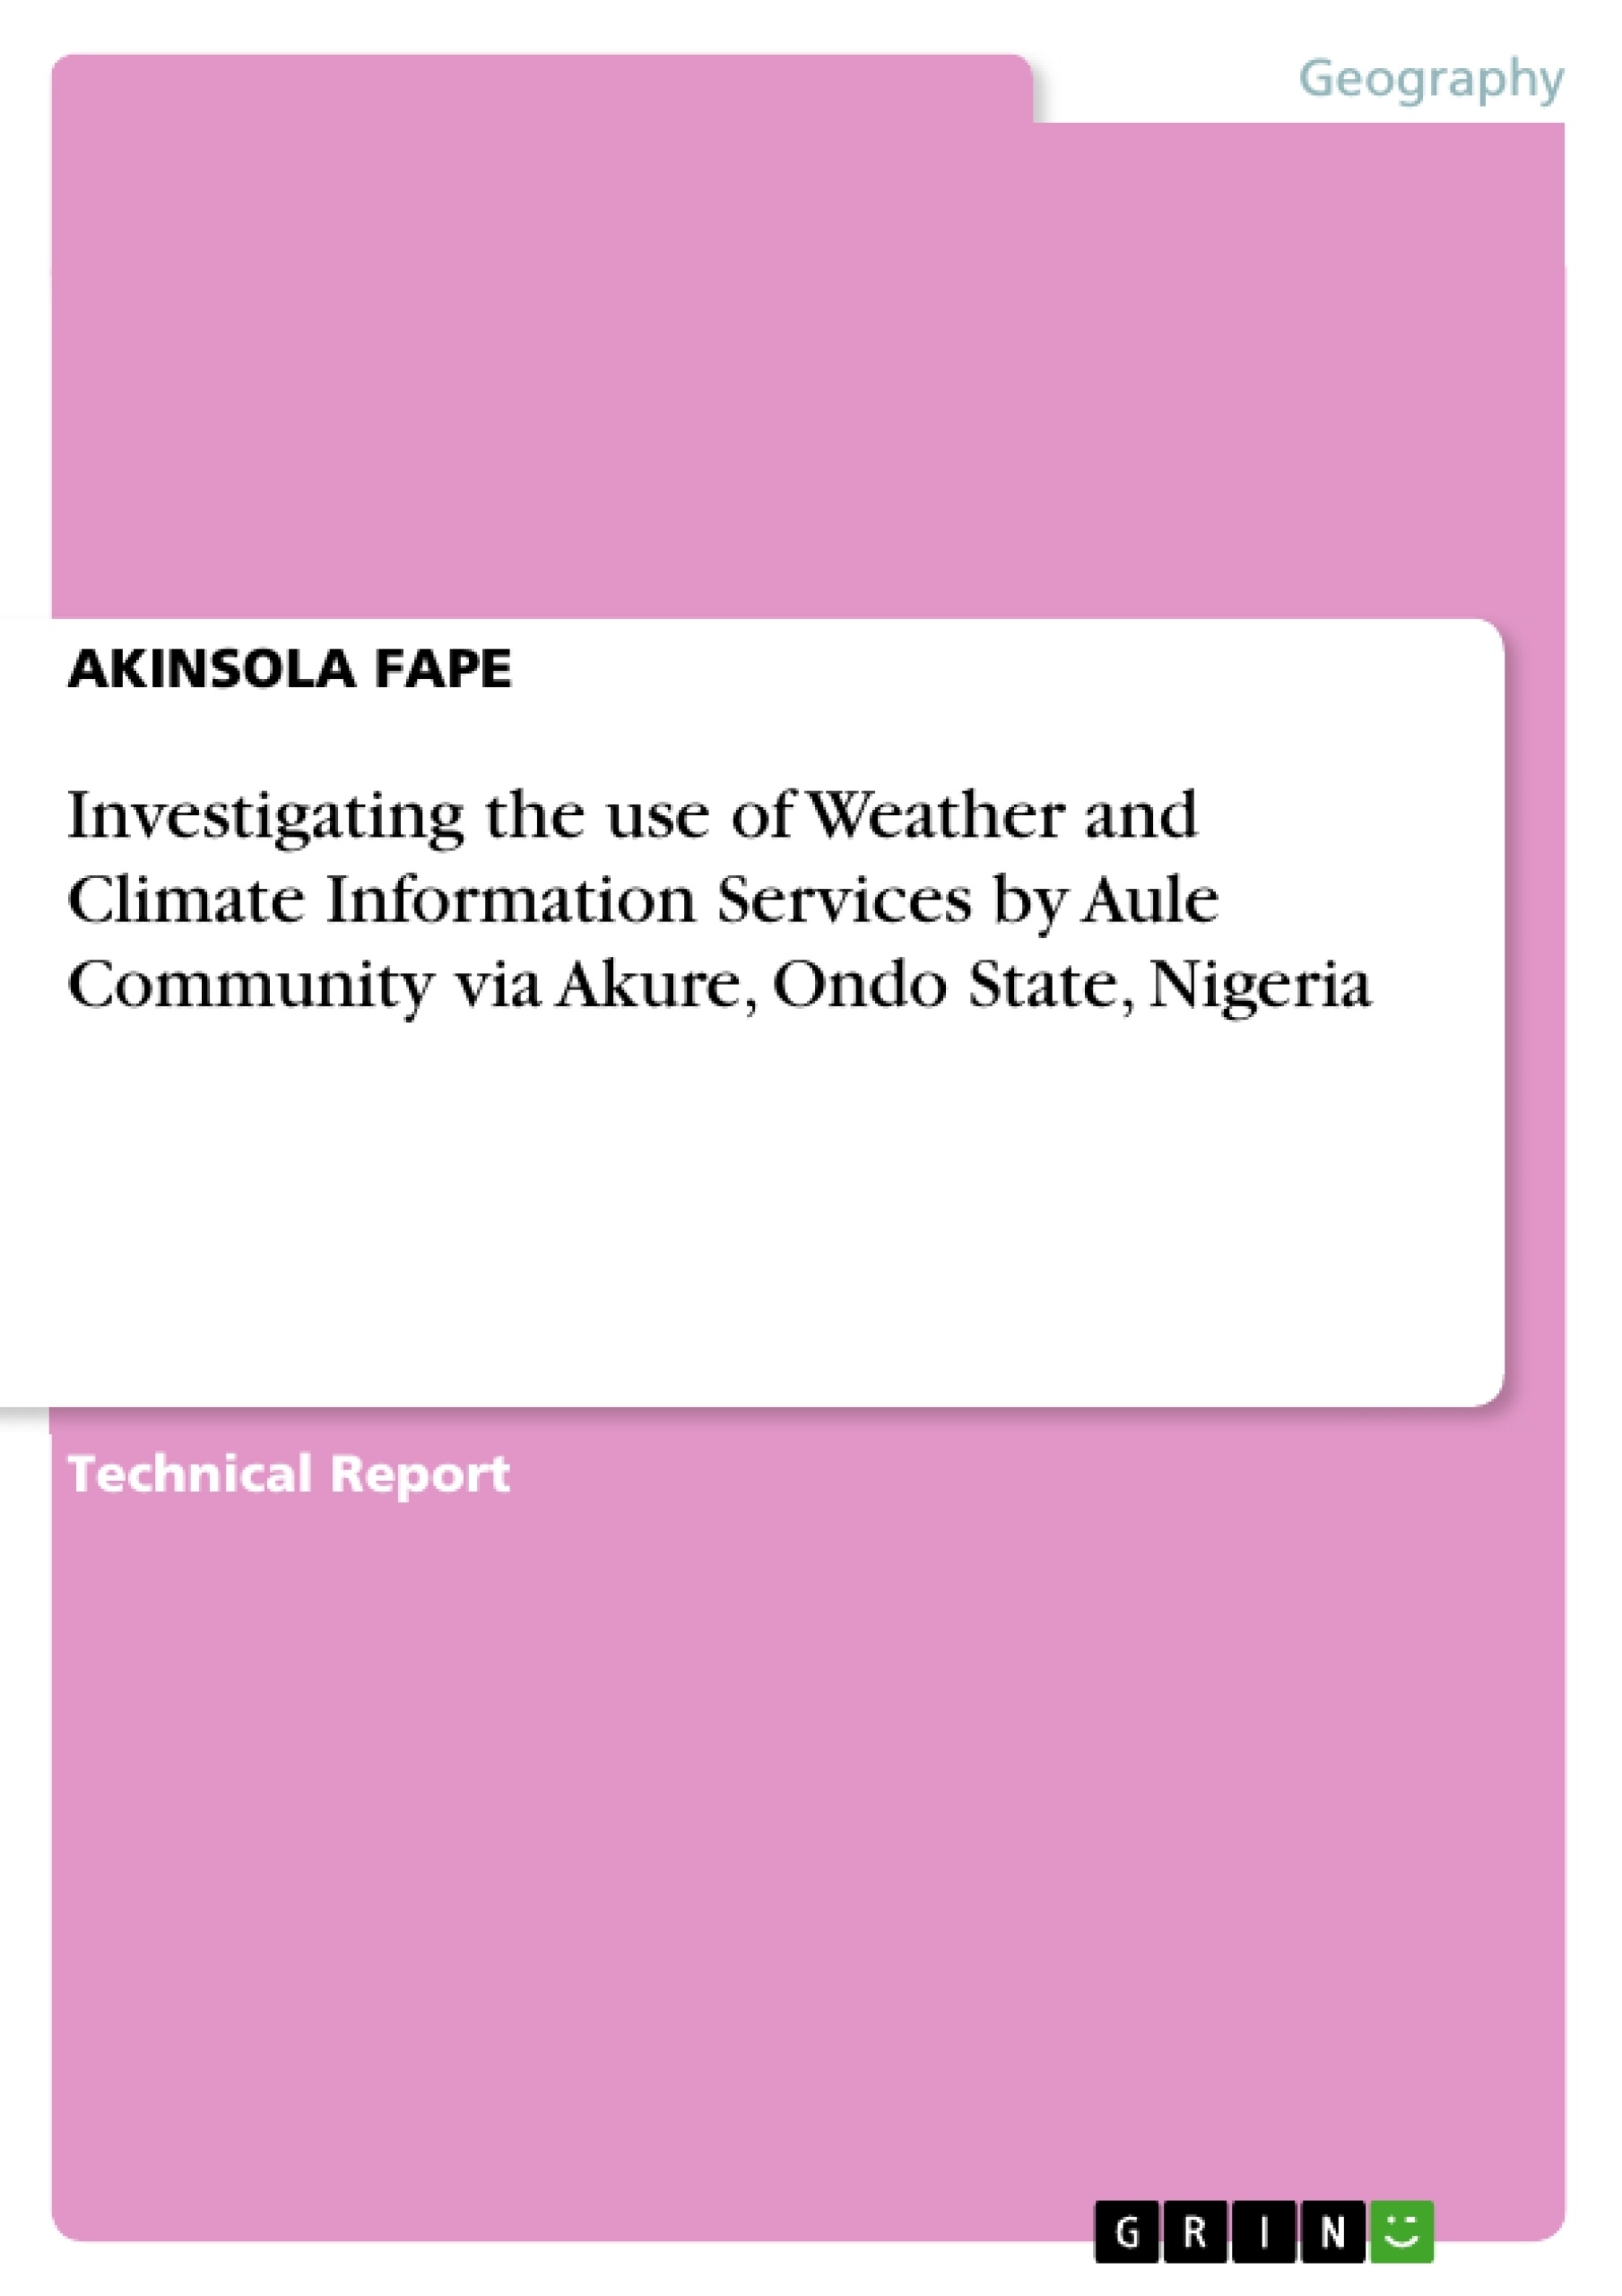 Título: Investigating the use of Weather and Climate Information Services by Aule Community via Akure, Ondo State, Nigeria